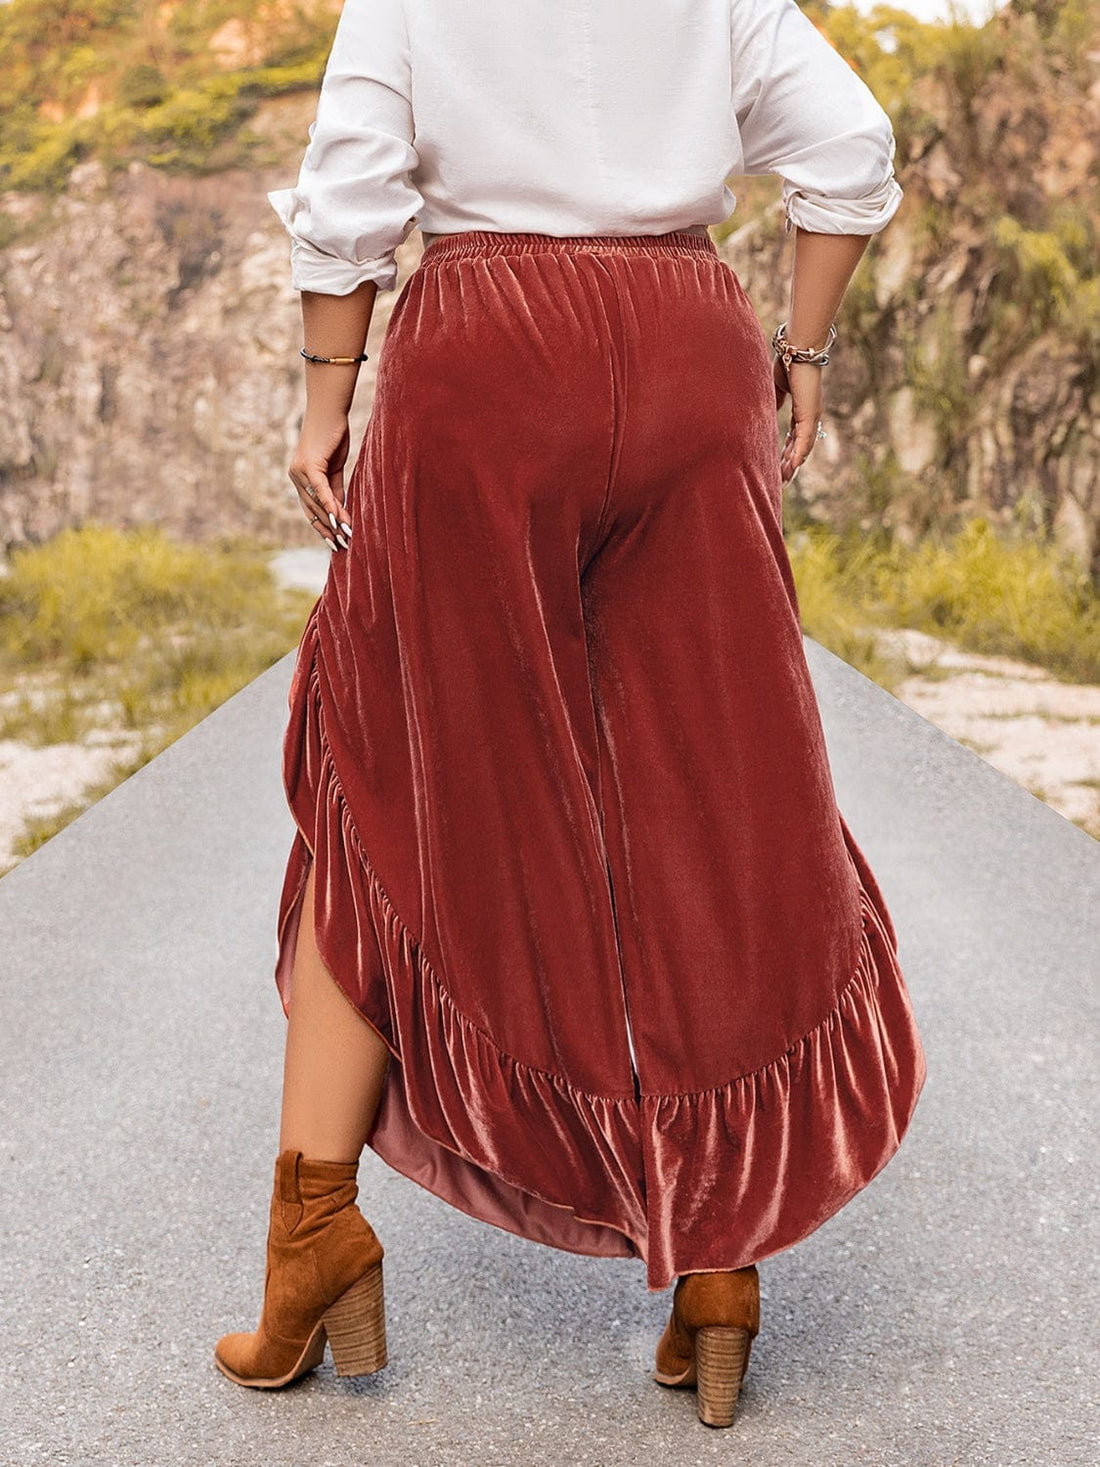 "Image: A model wearing Unique Kulture Plus Size Ruffled Slit Pants. The pants are a stylish and trendy addition to plus-size fashion, featuring a high waist with ruffled detailing and a thigh-high slit on one leg. The design is both flattering and fashionable, perfect for a confident and chic look."